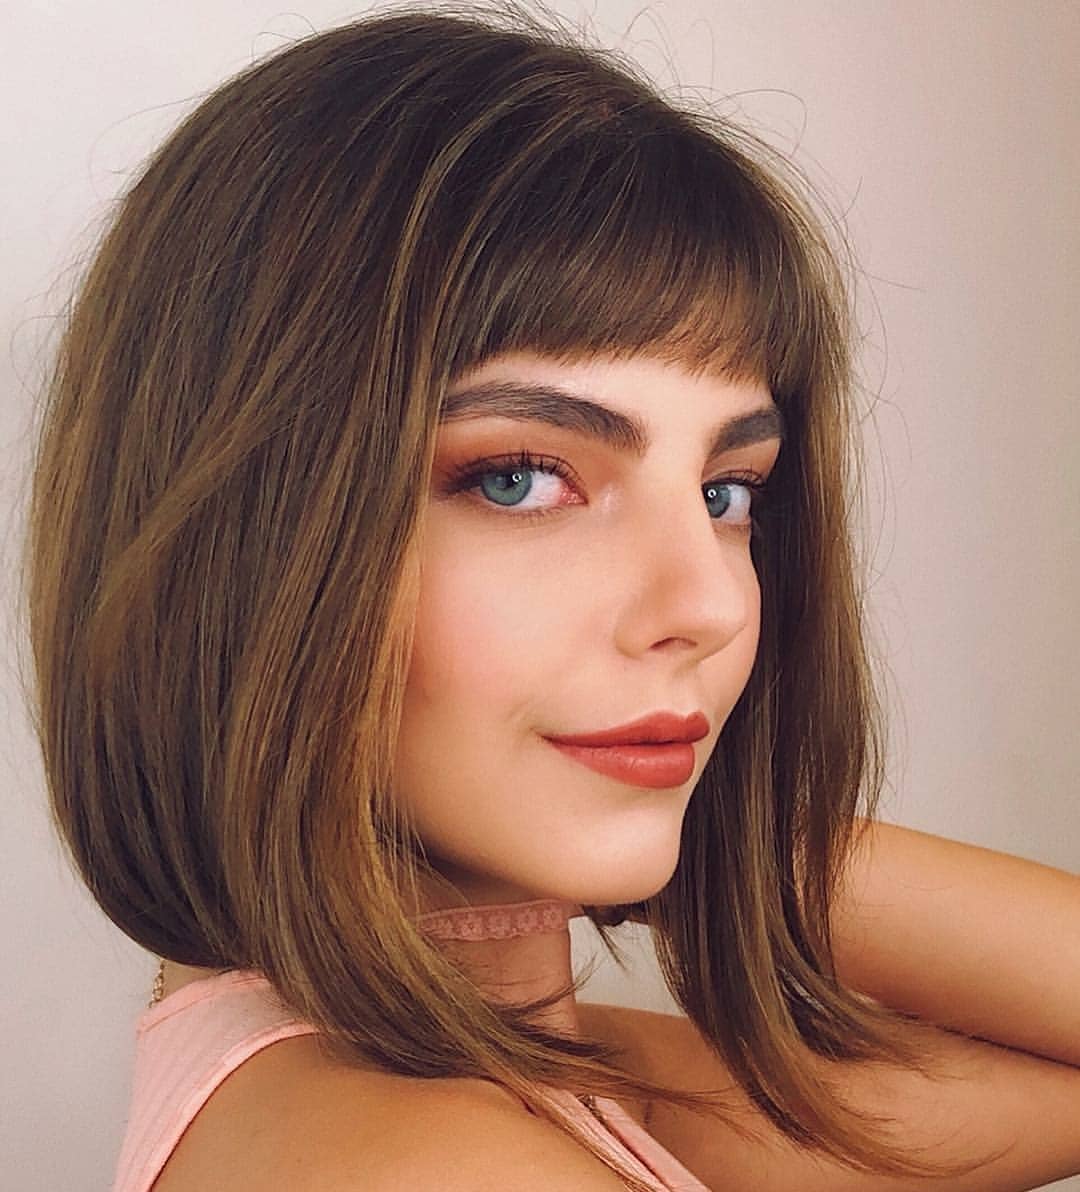 10 Classic Shoulder Length Haircut Ideas - Red Alert! Women Hairstyles 2020